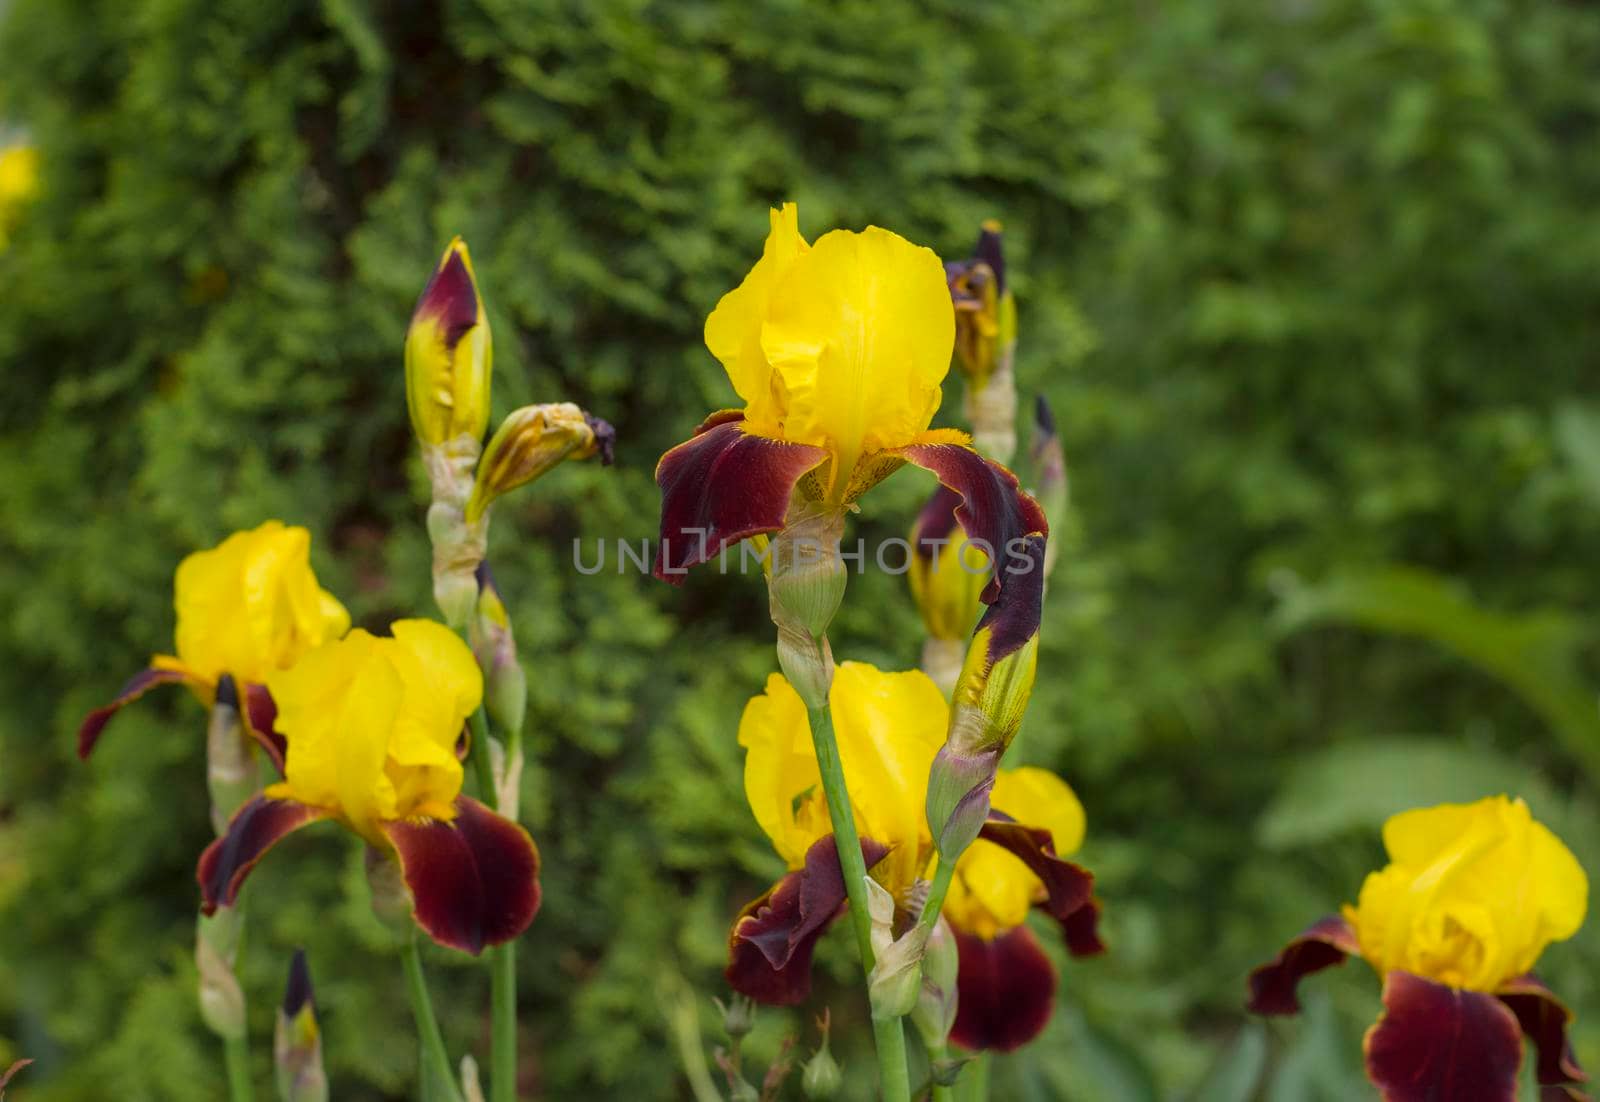 Burgundy yellow flowers of iris on a green background